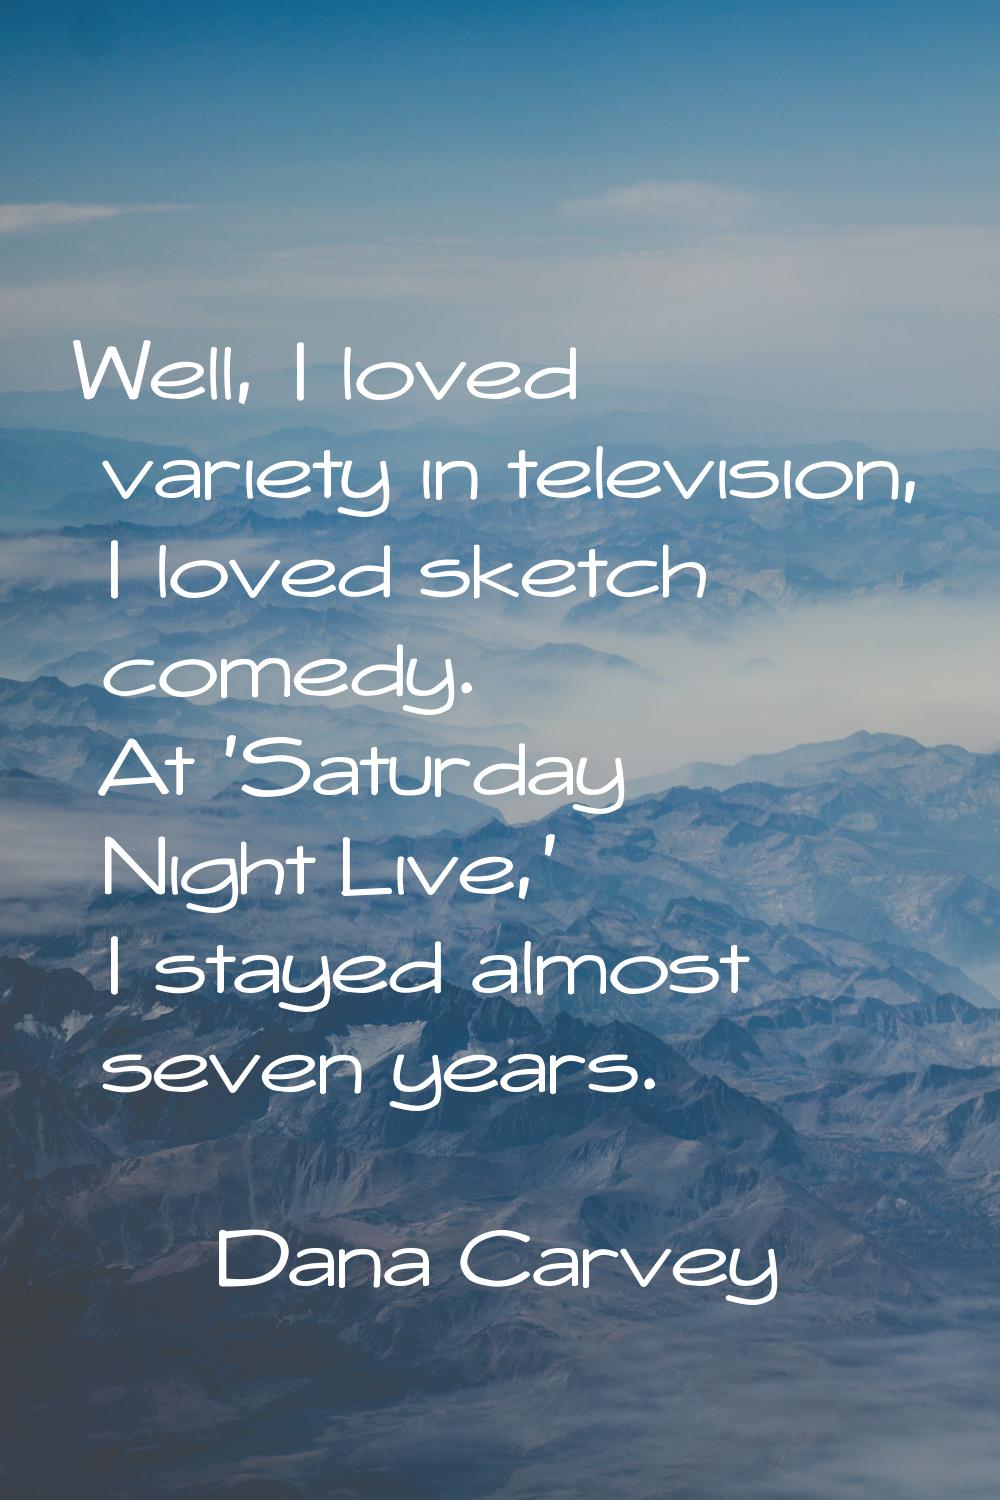 Well, I loved variety in television, I loved sketch comedy. At 'Saturday Night Live,' I stayed almo